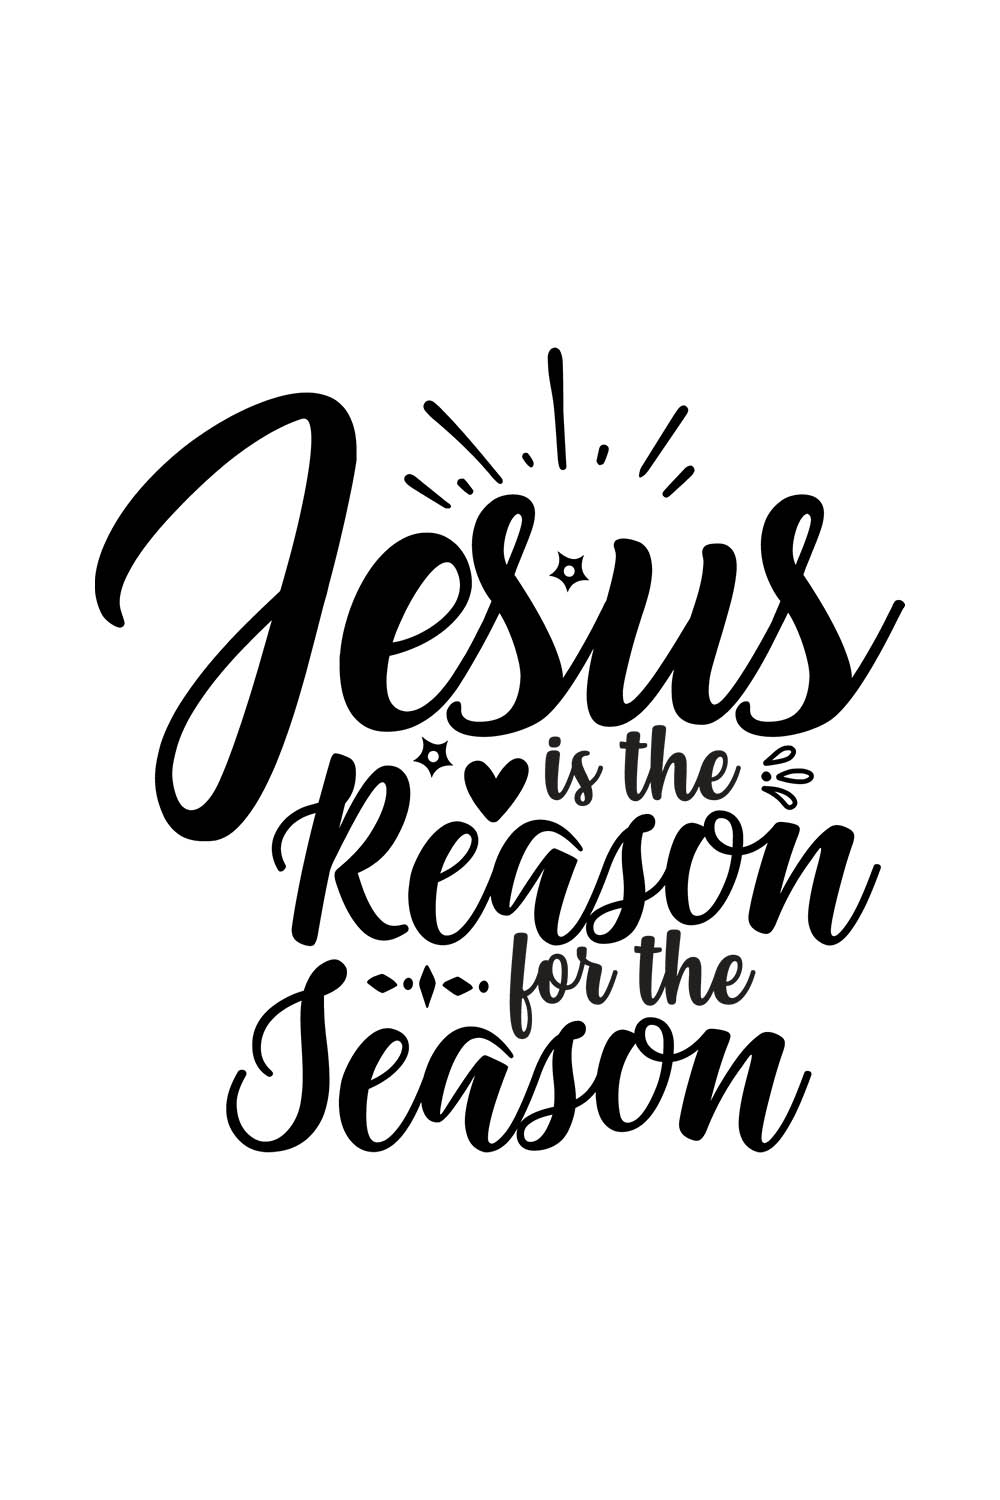 Image with elegant black lettering for prints Jesus is the Reason for the Season.